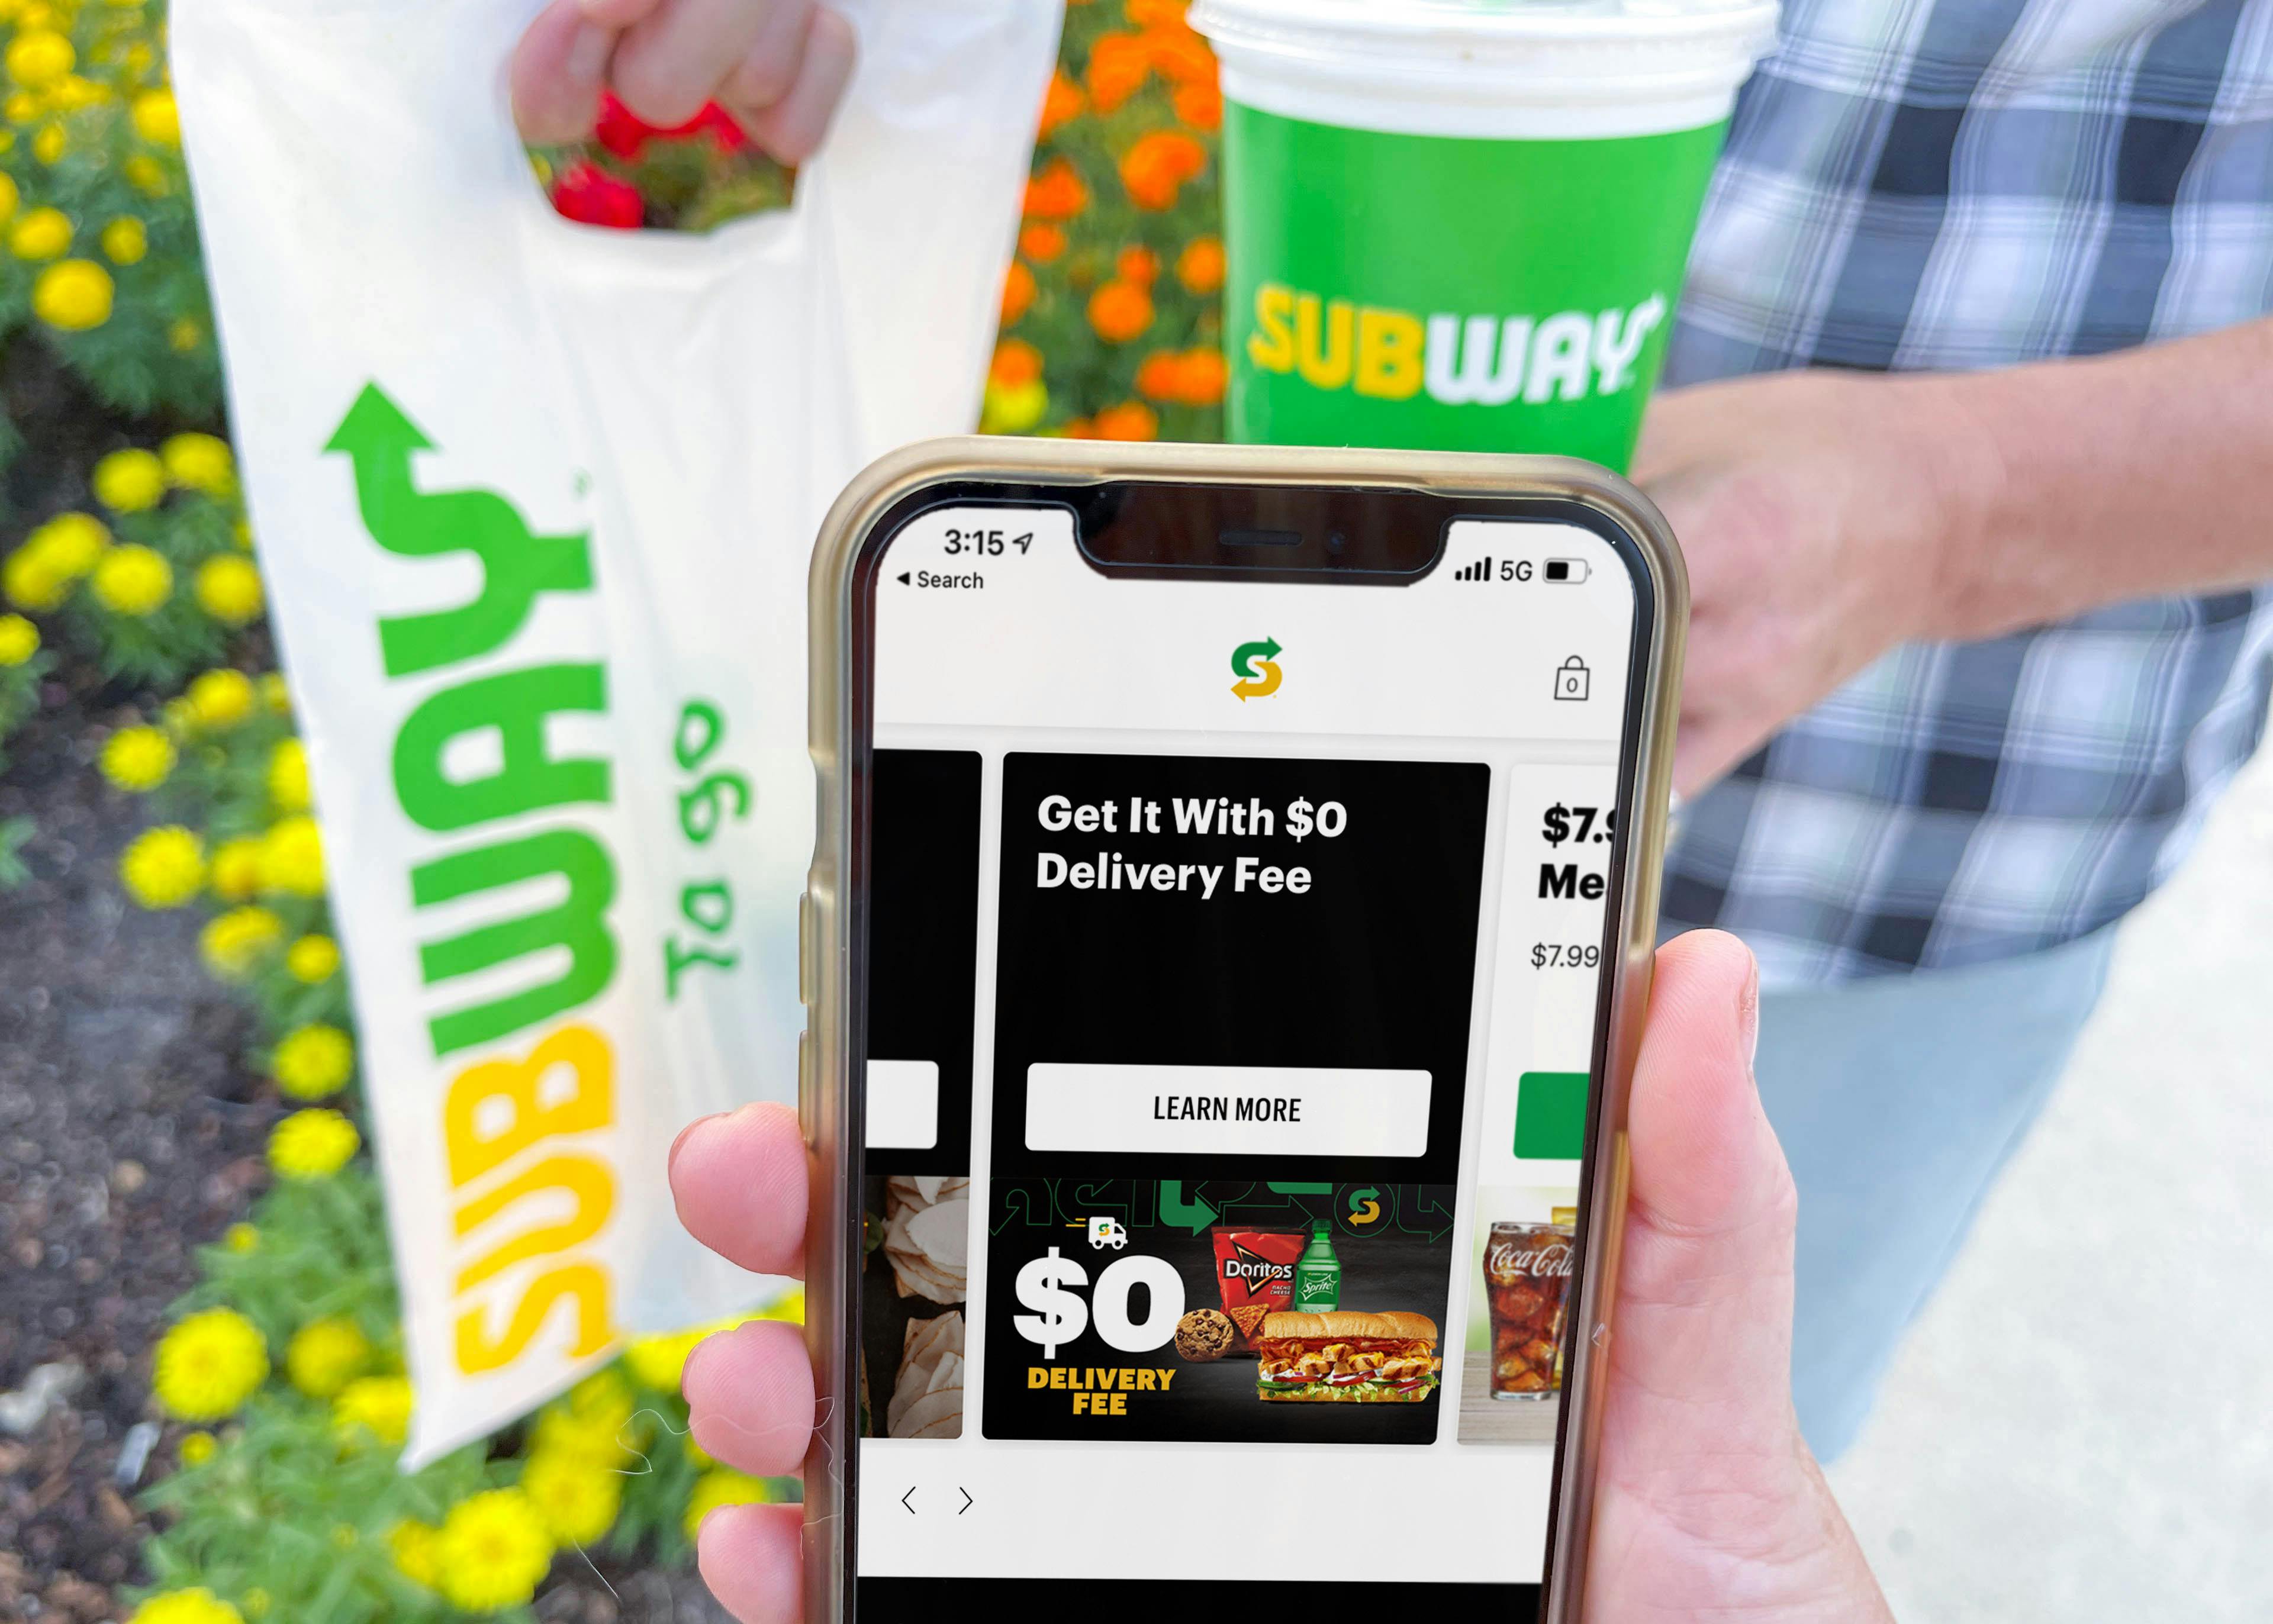 subway app with deals on cellphone next to subway bag